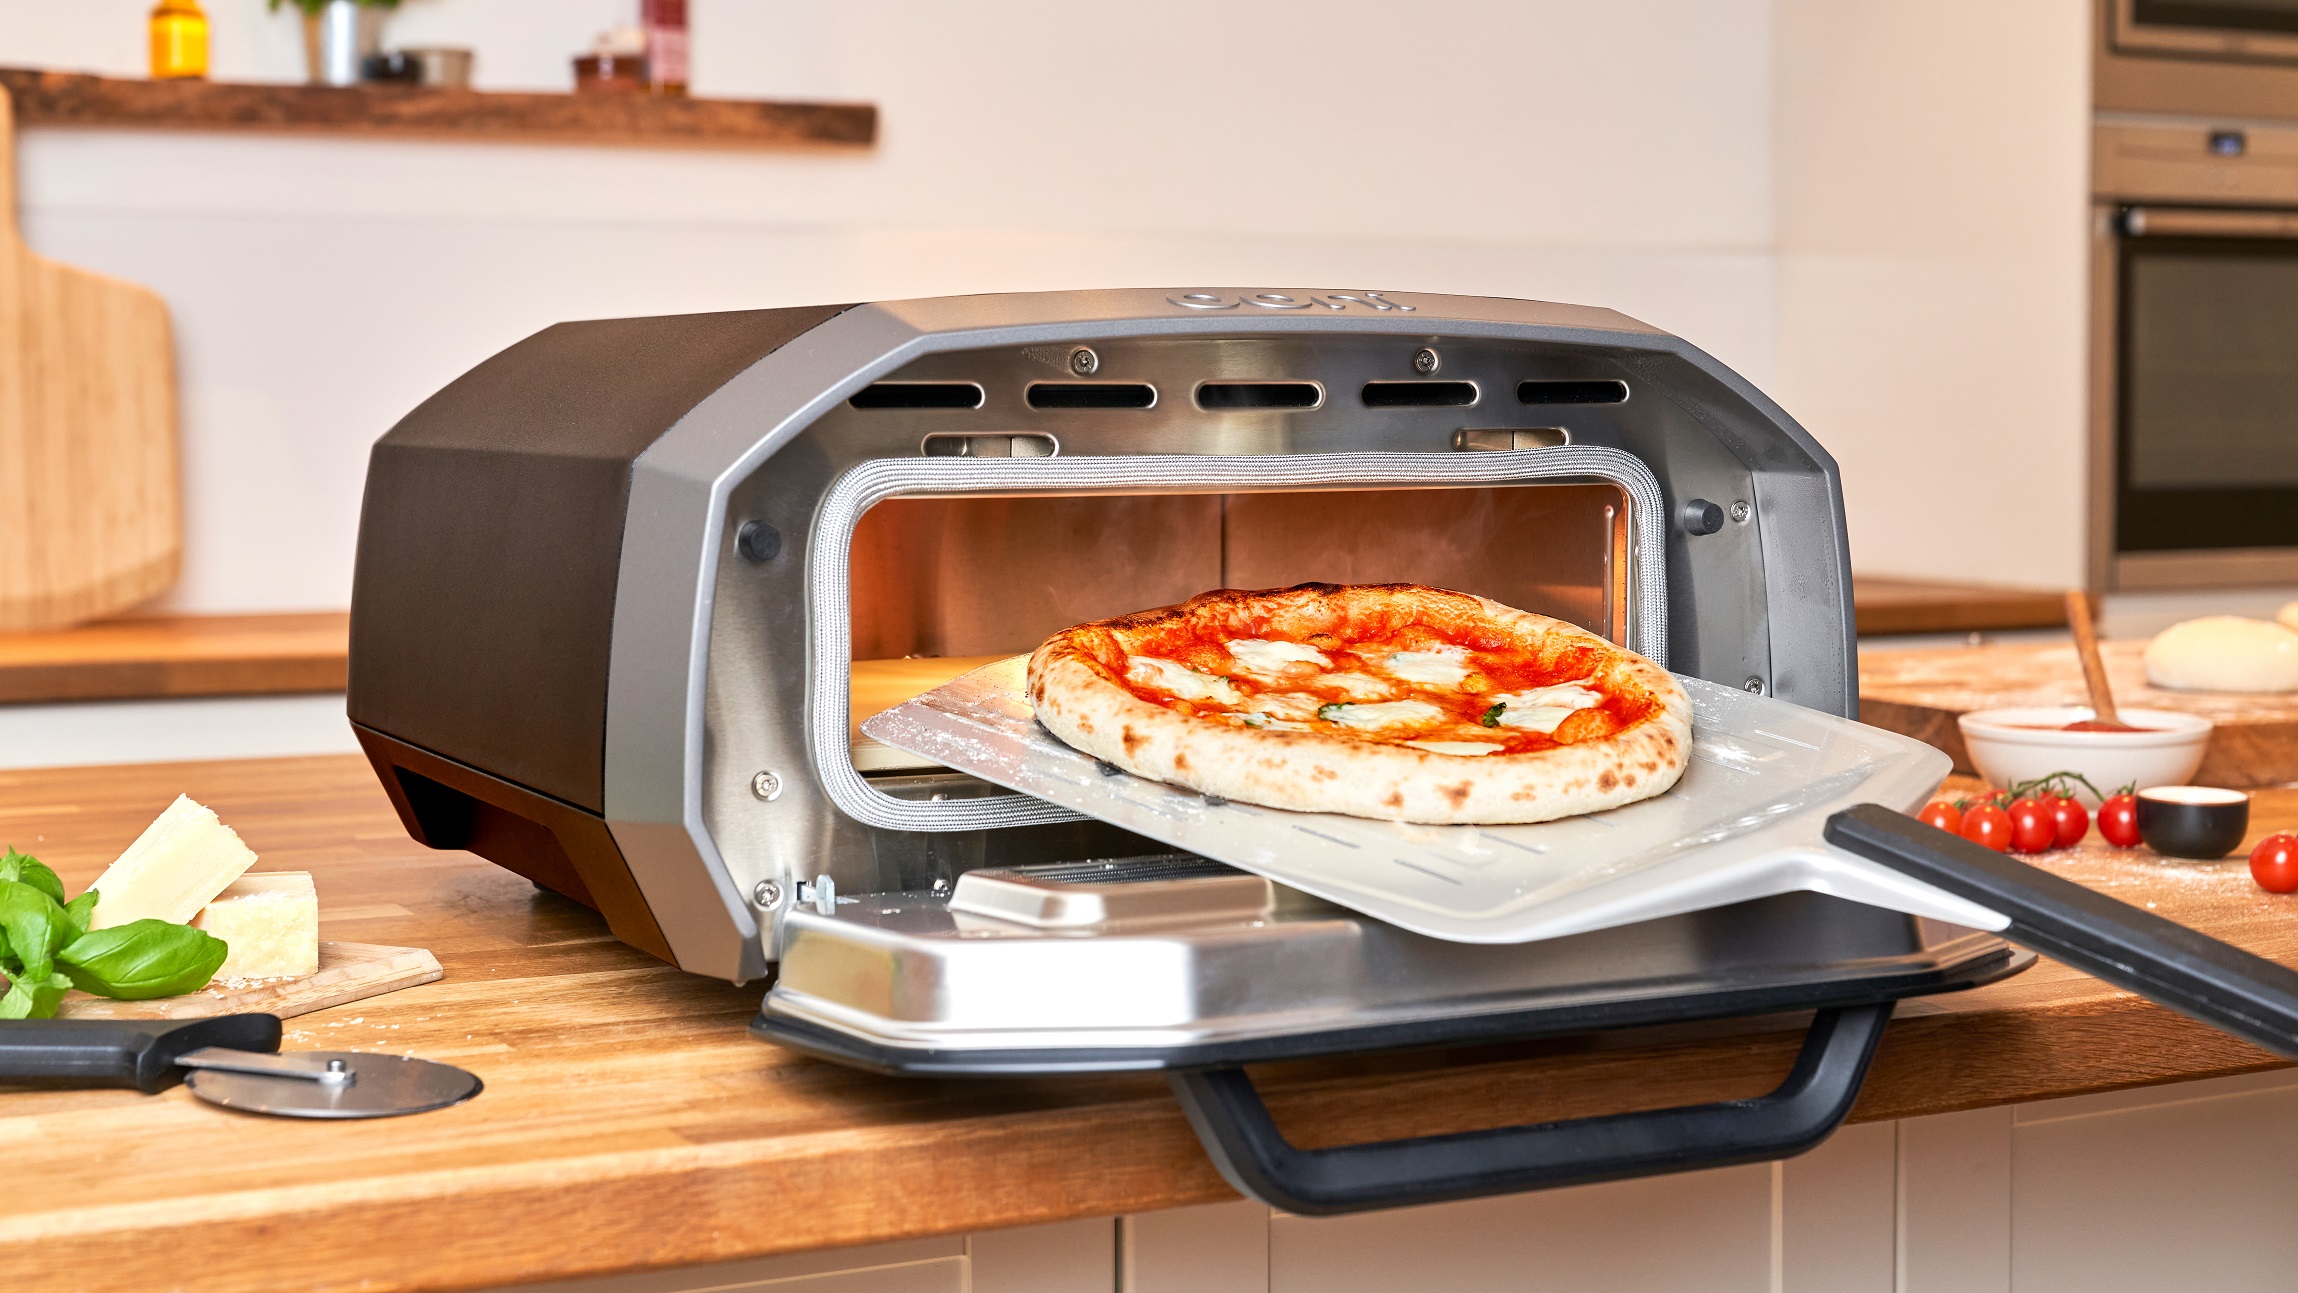 Read more about the article Ny partner er garant for gode pizzaer